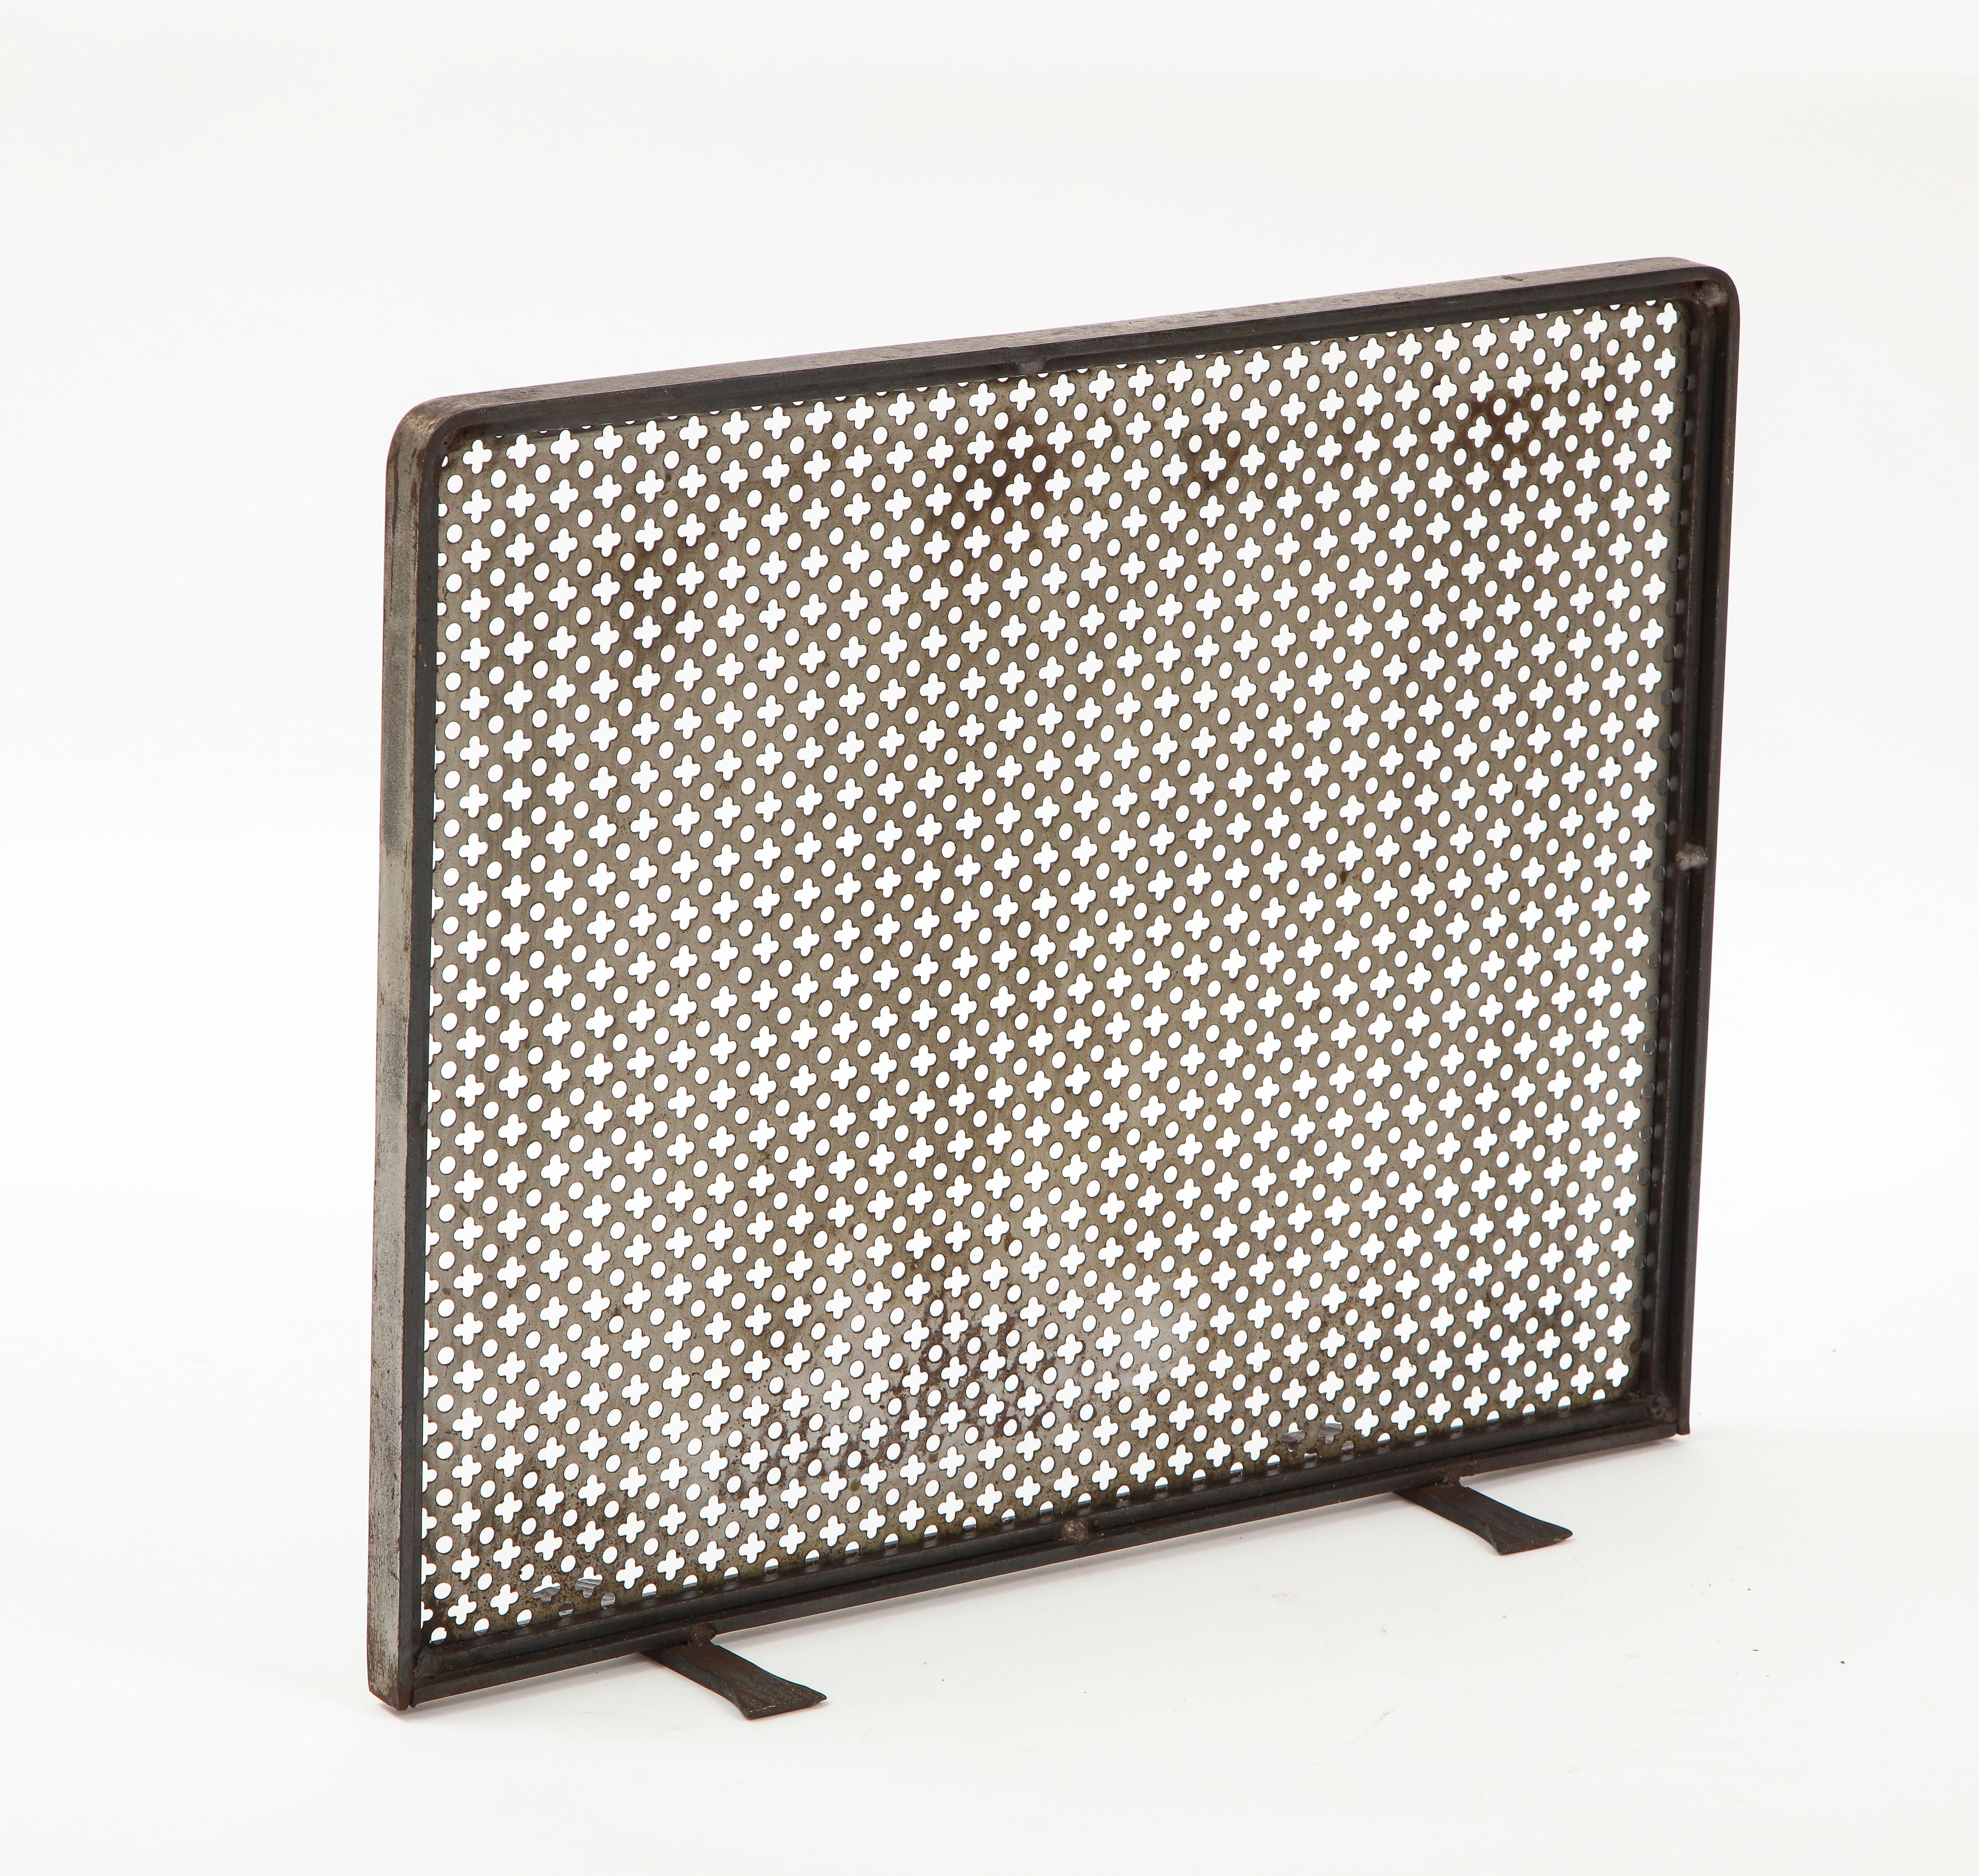 Mid-Century Modern Metal Fireplace Screen in the Style of Mathieu Matégot, French, c. 1950